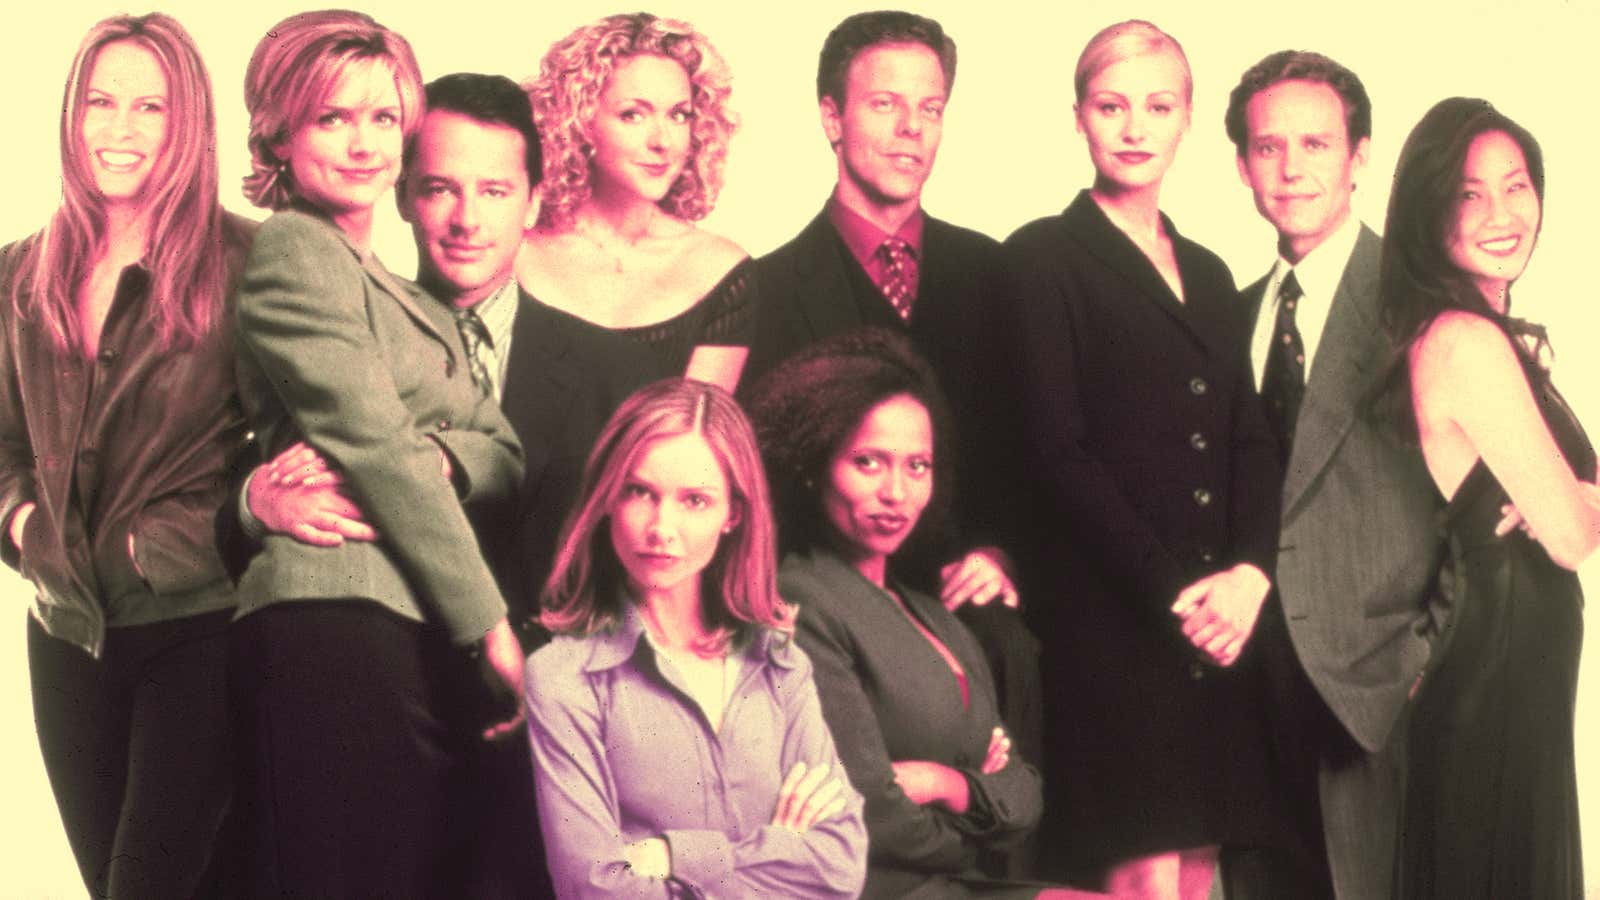 The Ally McBeal cast in 1998. (Photo: Fotos International/Getty Images. Graphic: Libby McGuire.)